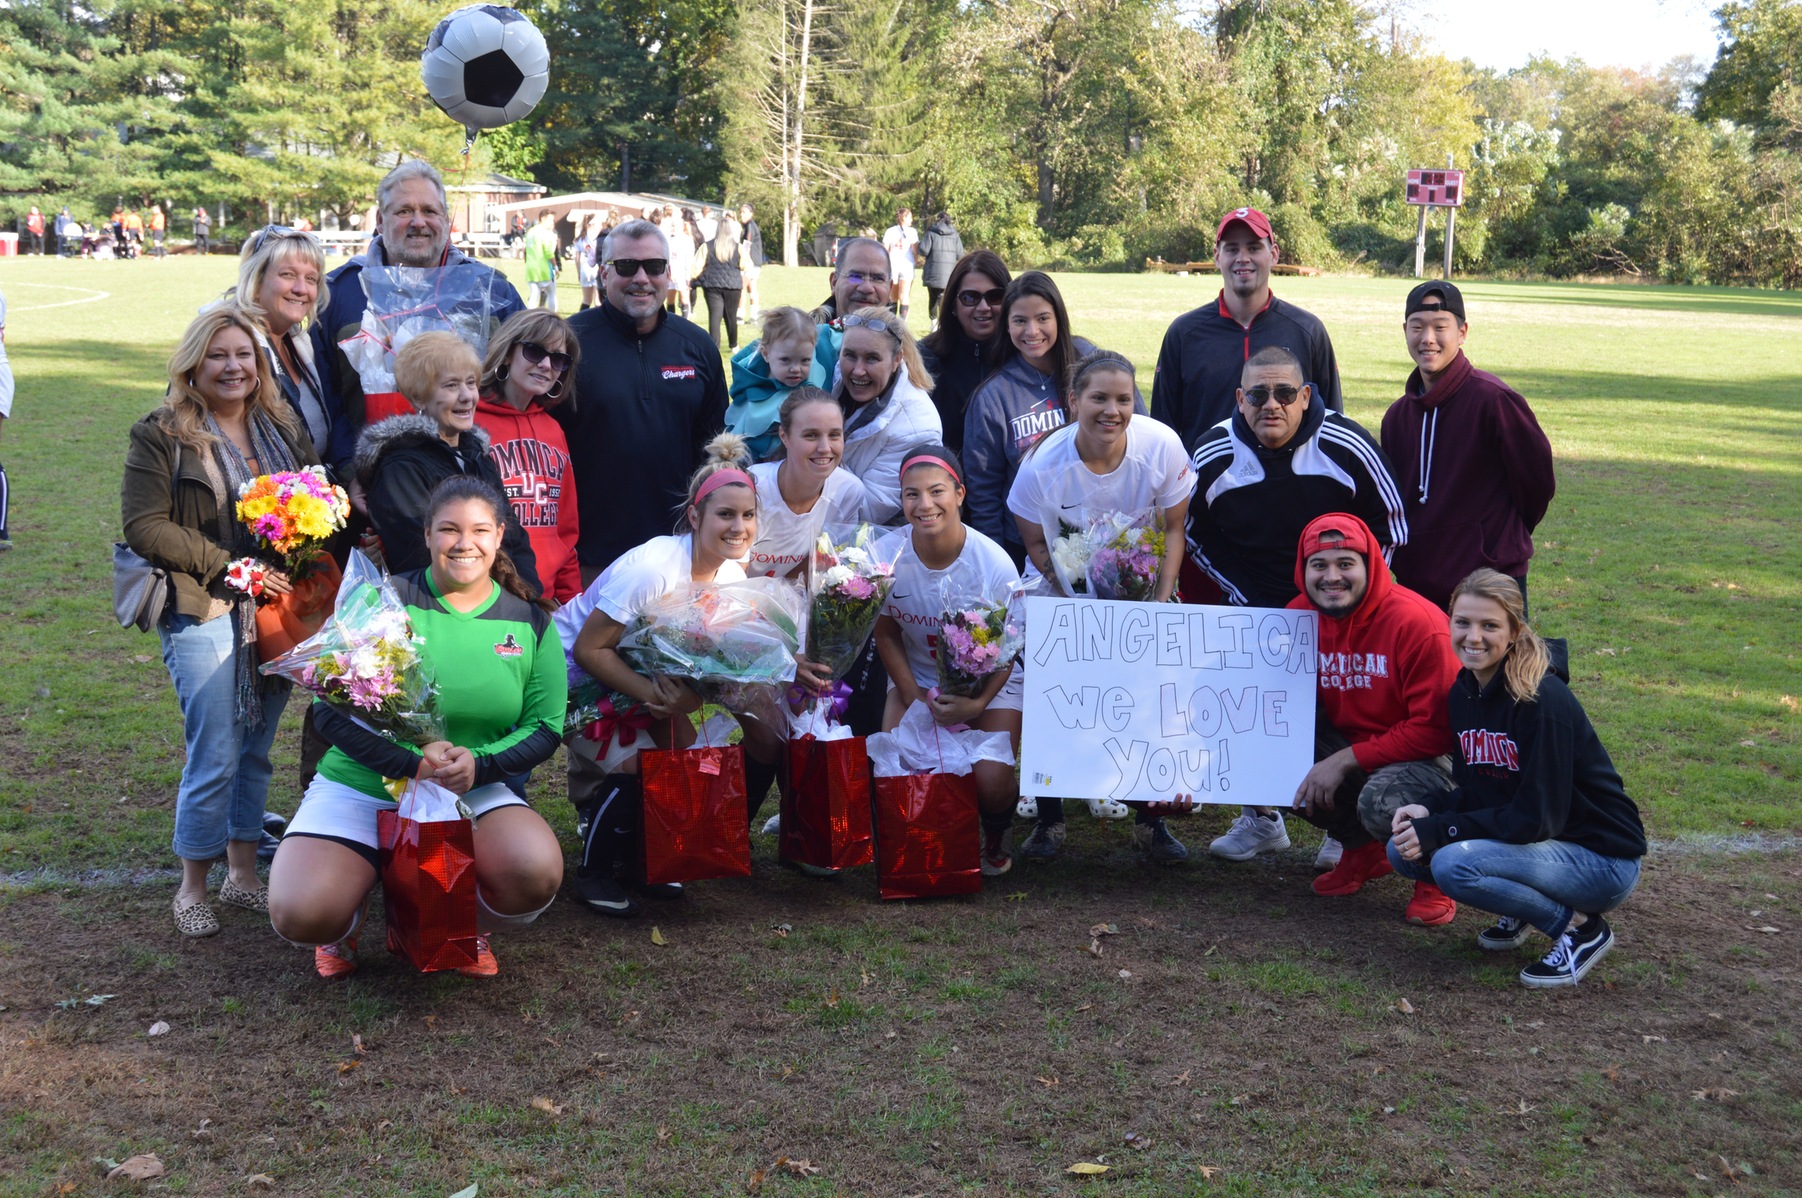 WOMEN'S SOCCER EARNS TRIP TO PLAYOFFS WITH WIN ON SENIOR DAY